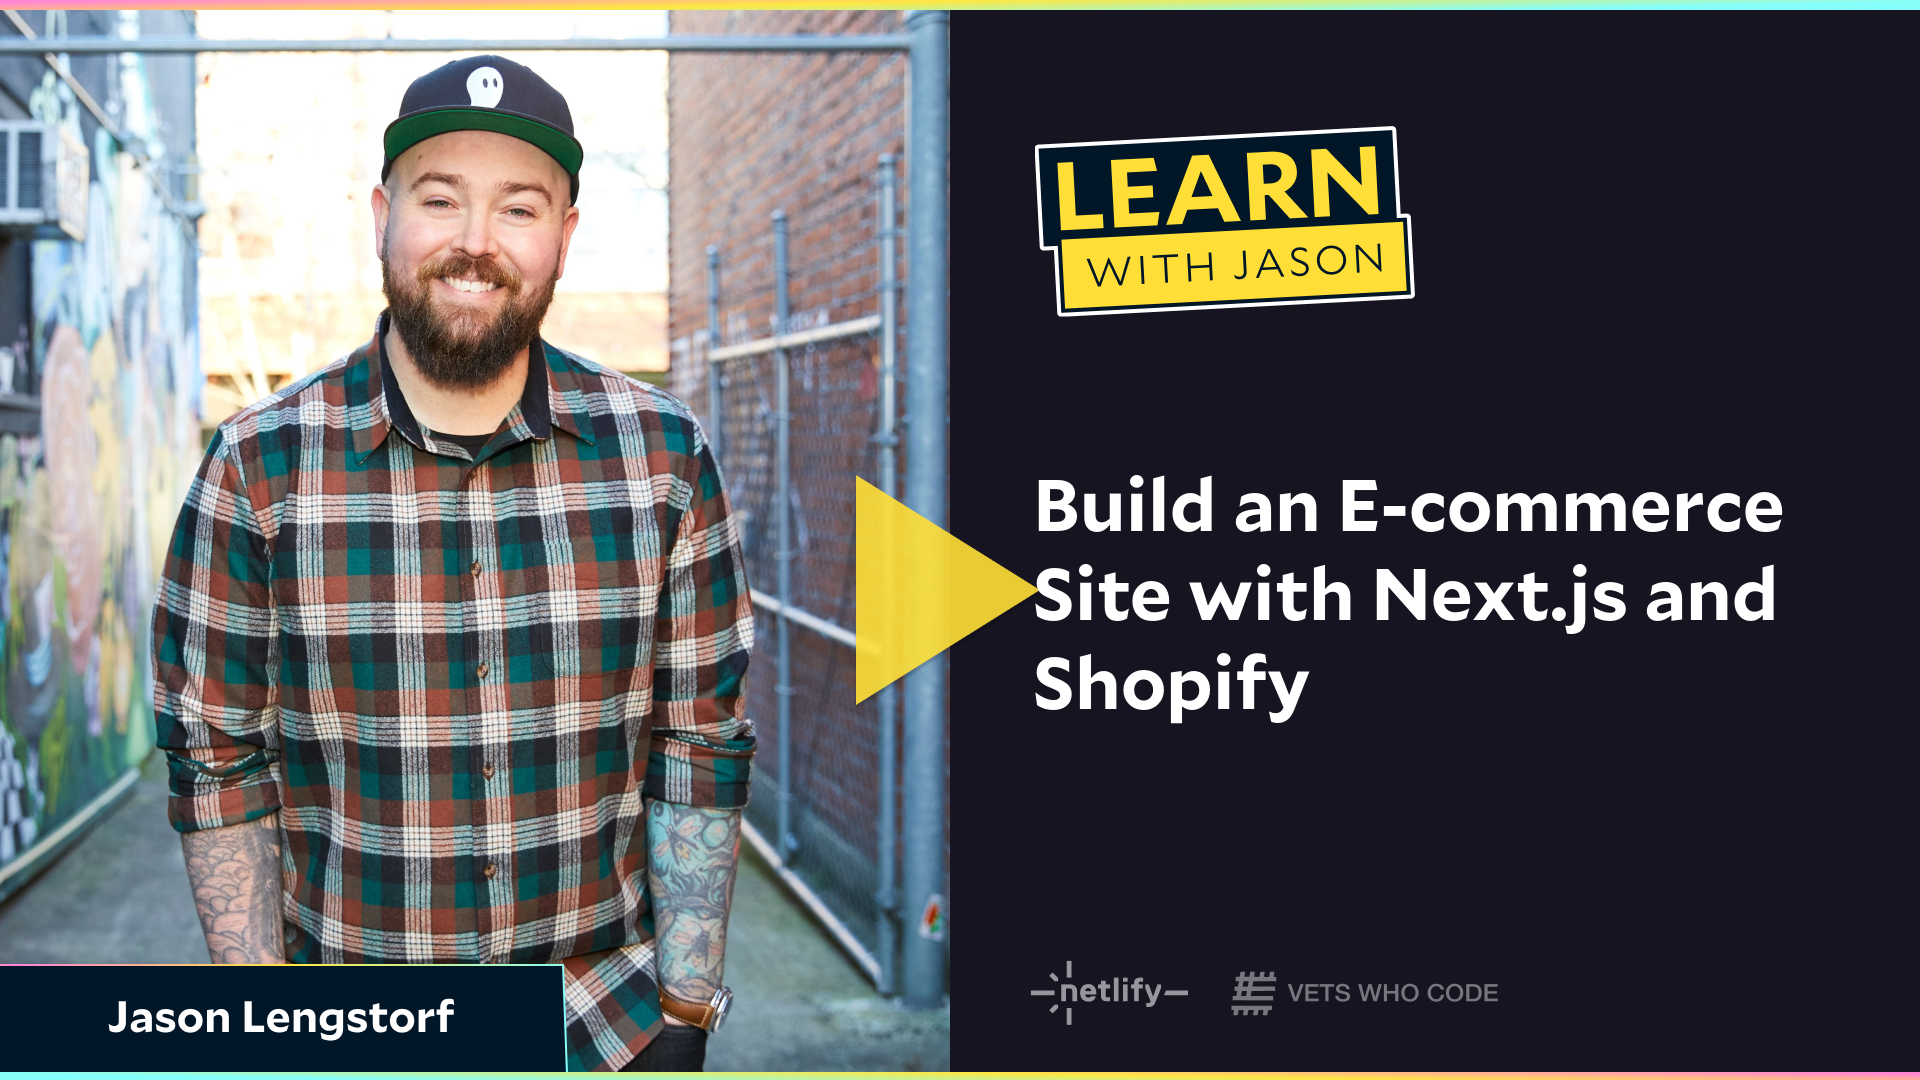 Build an E-commerce Site with Next.js and Shopify (with Jason Lengstorf)